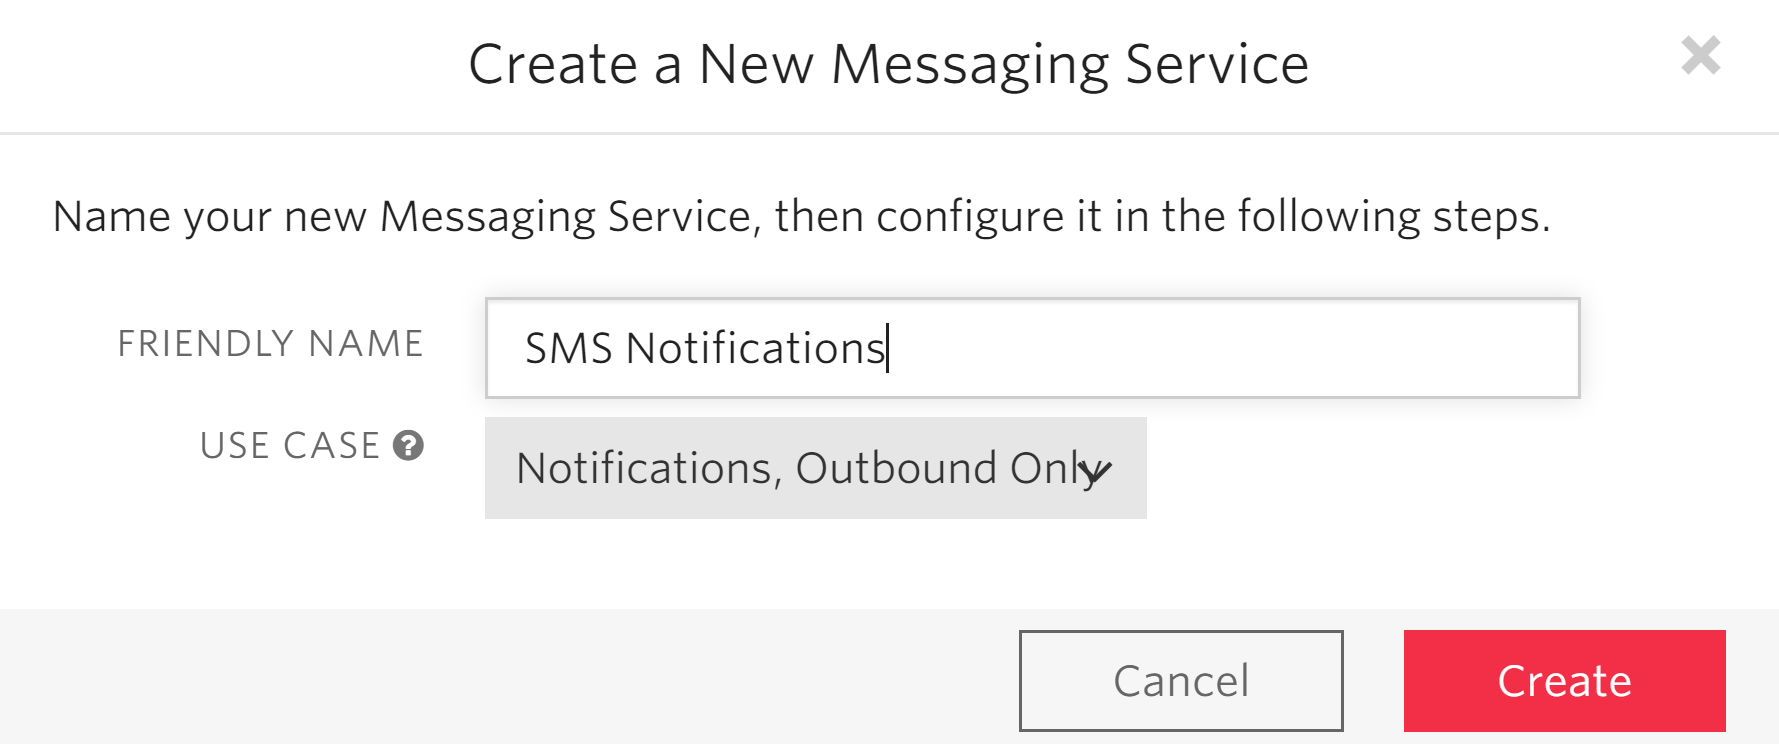 Create New Messaging Service.PNG